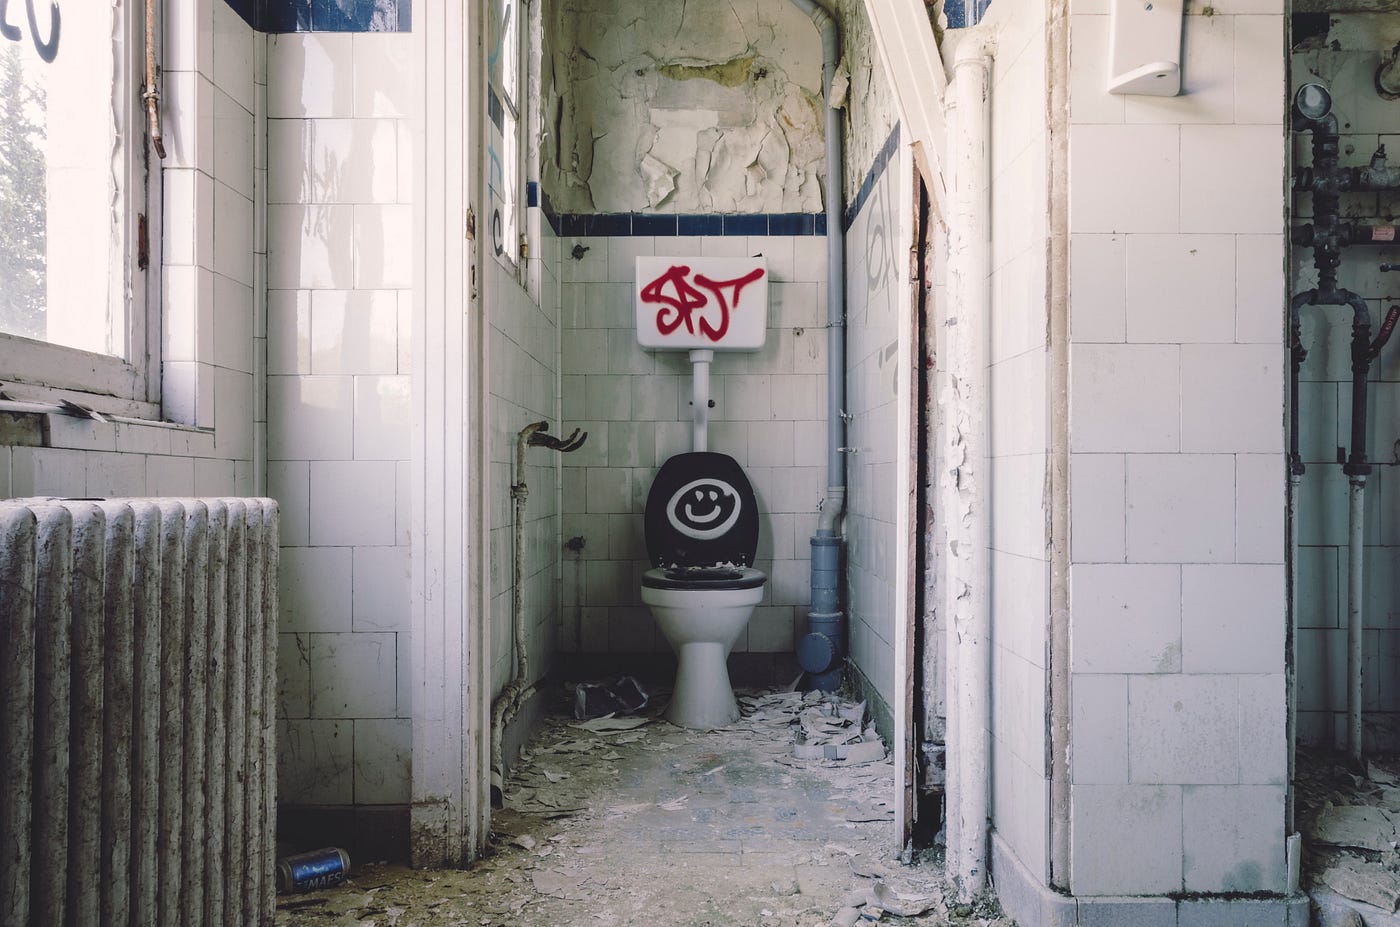 The Terror in the Toilet Whats Up With Bathroom Ghosts, and Why Are They Watching OUR Unfinished Business? by Cat Baklarz Writers Blokke Medium image picture